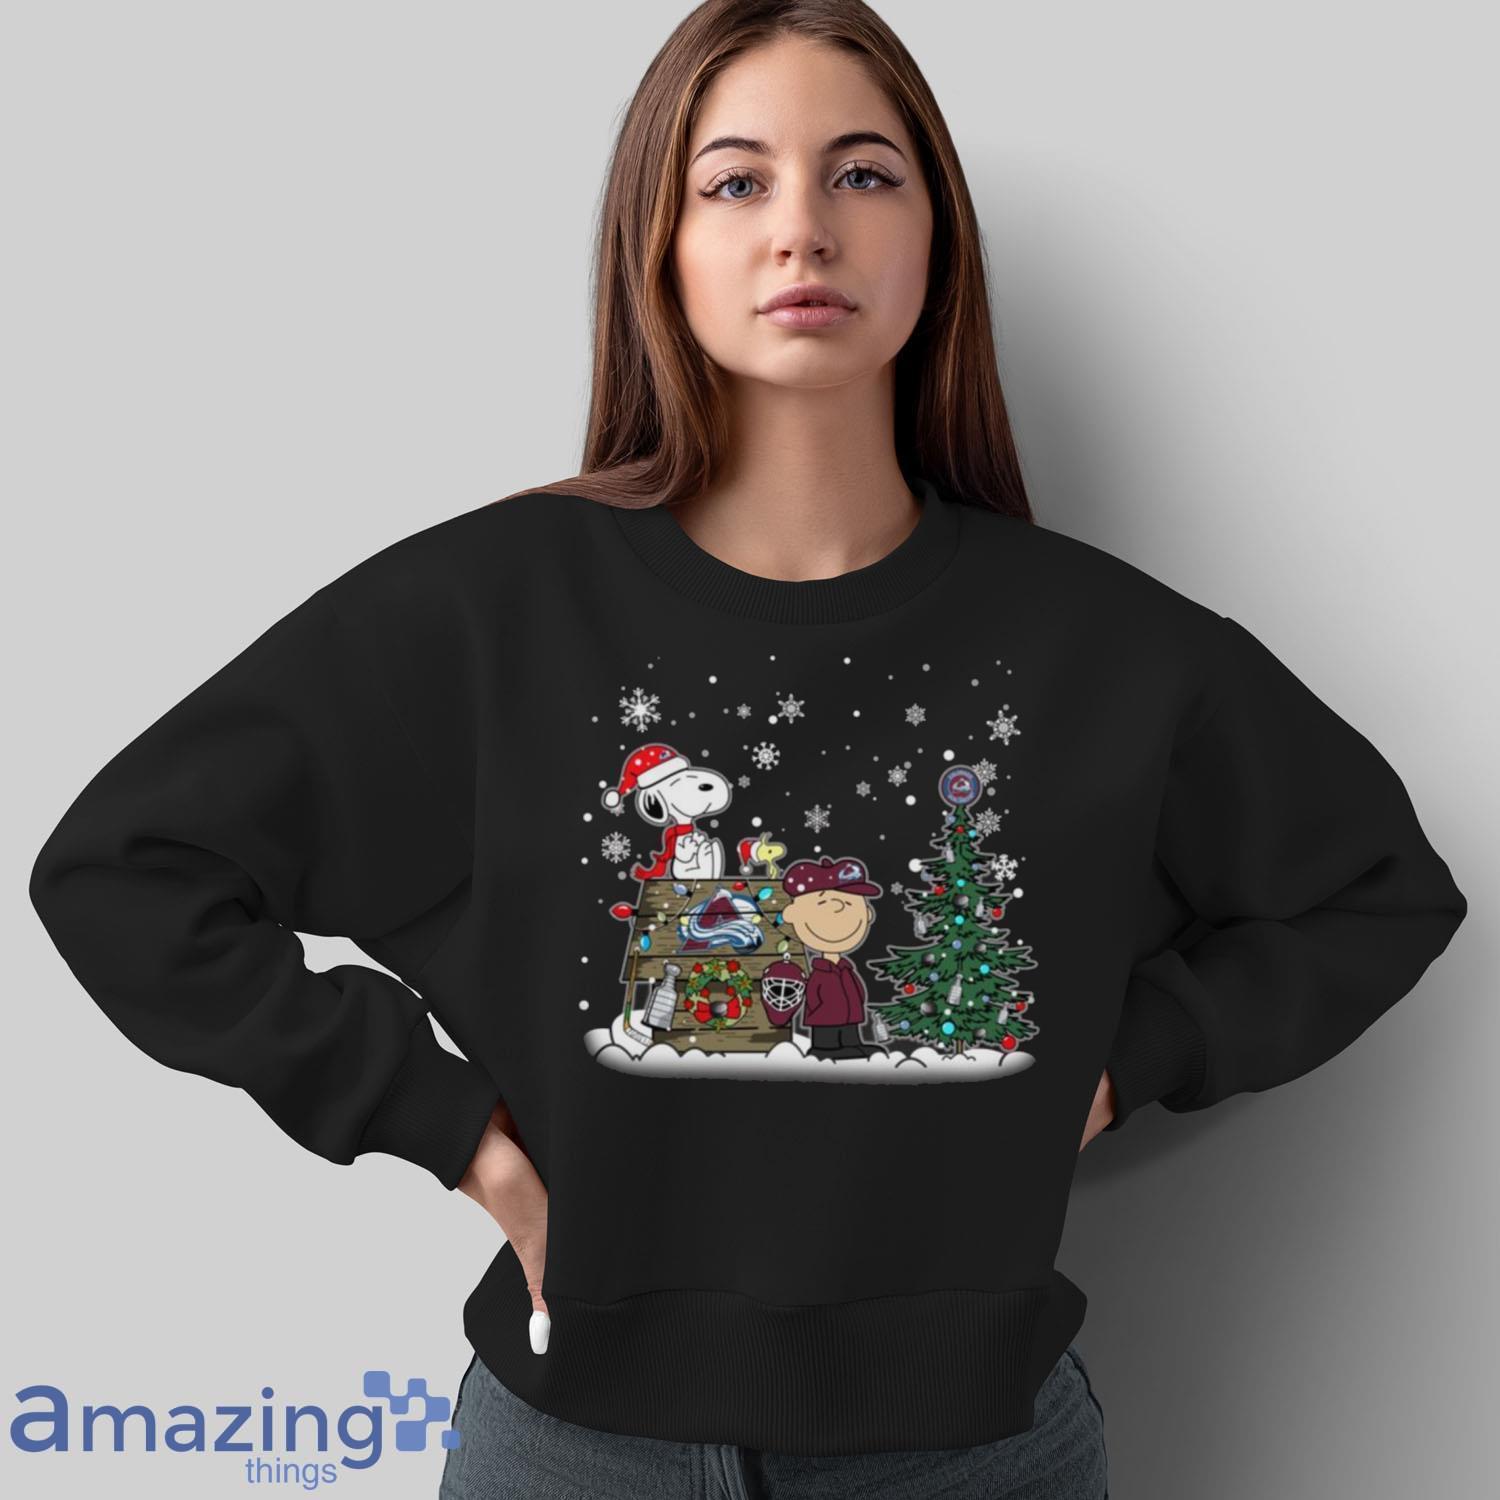 https://image.whatamazingthings.com/2023/08/nhl-colorado-avalanche-snoopy-charlie-brown-woodstock-christmas-stanley-cup-hockey-t-shirt-christmas-gift-3.jpg